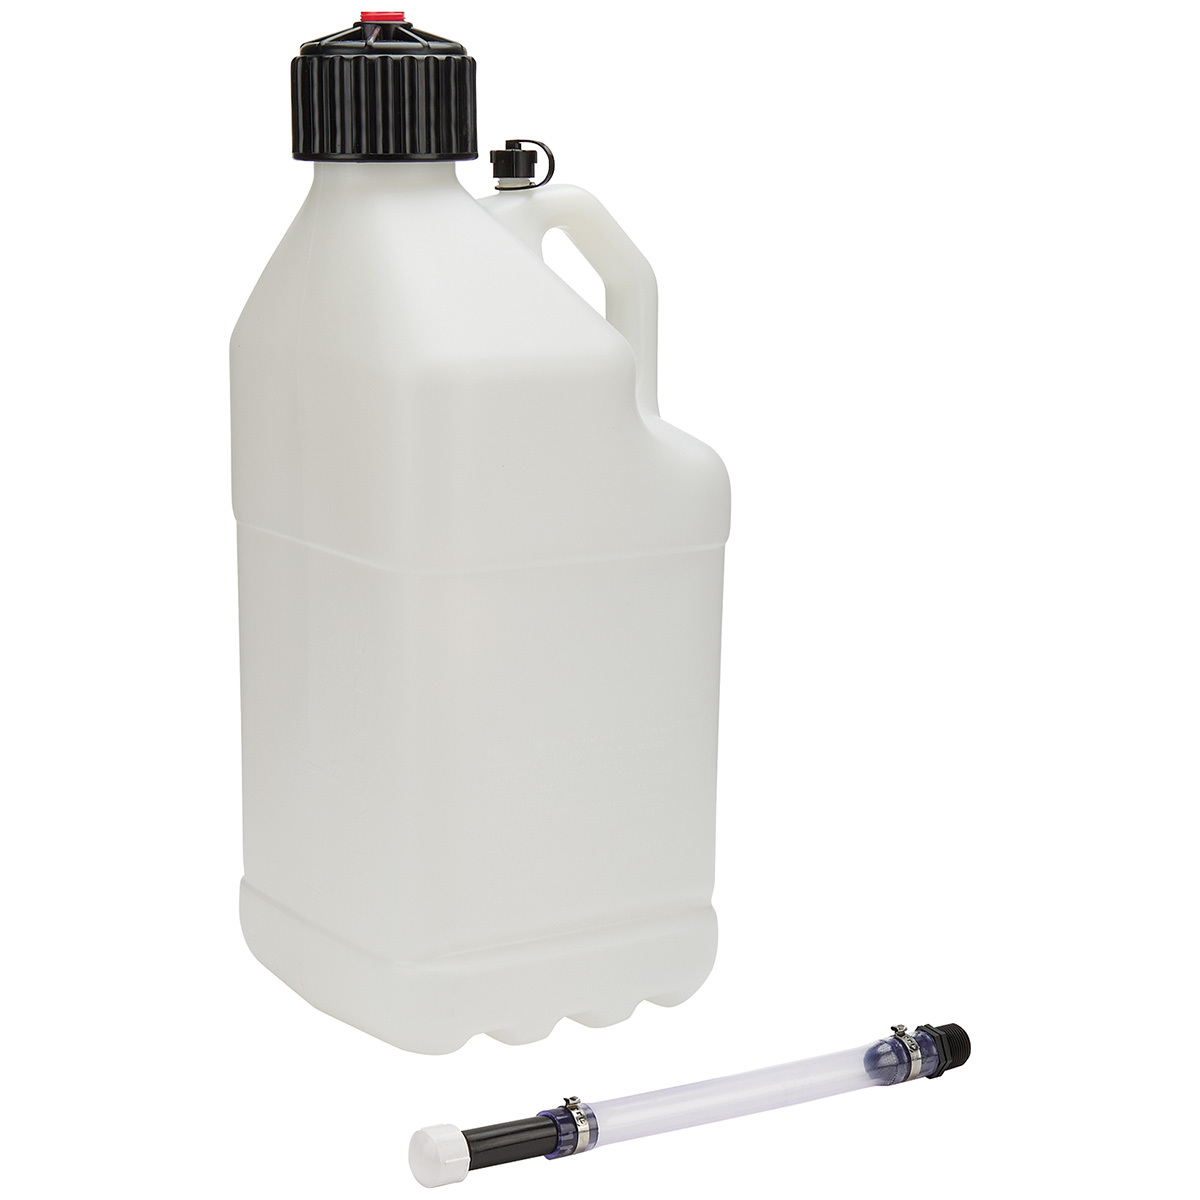 Allstar Performance 40120 Utility Jug, 5 gal, 9-1/2 x 9-1/2 x 22-3/4 in Tall, O-Ring Seal Cap, Screw-On Vent, Filler Hose, Square, Plastic, Clear, Each